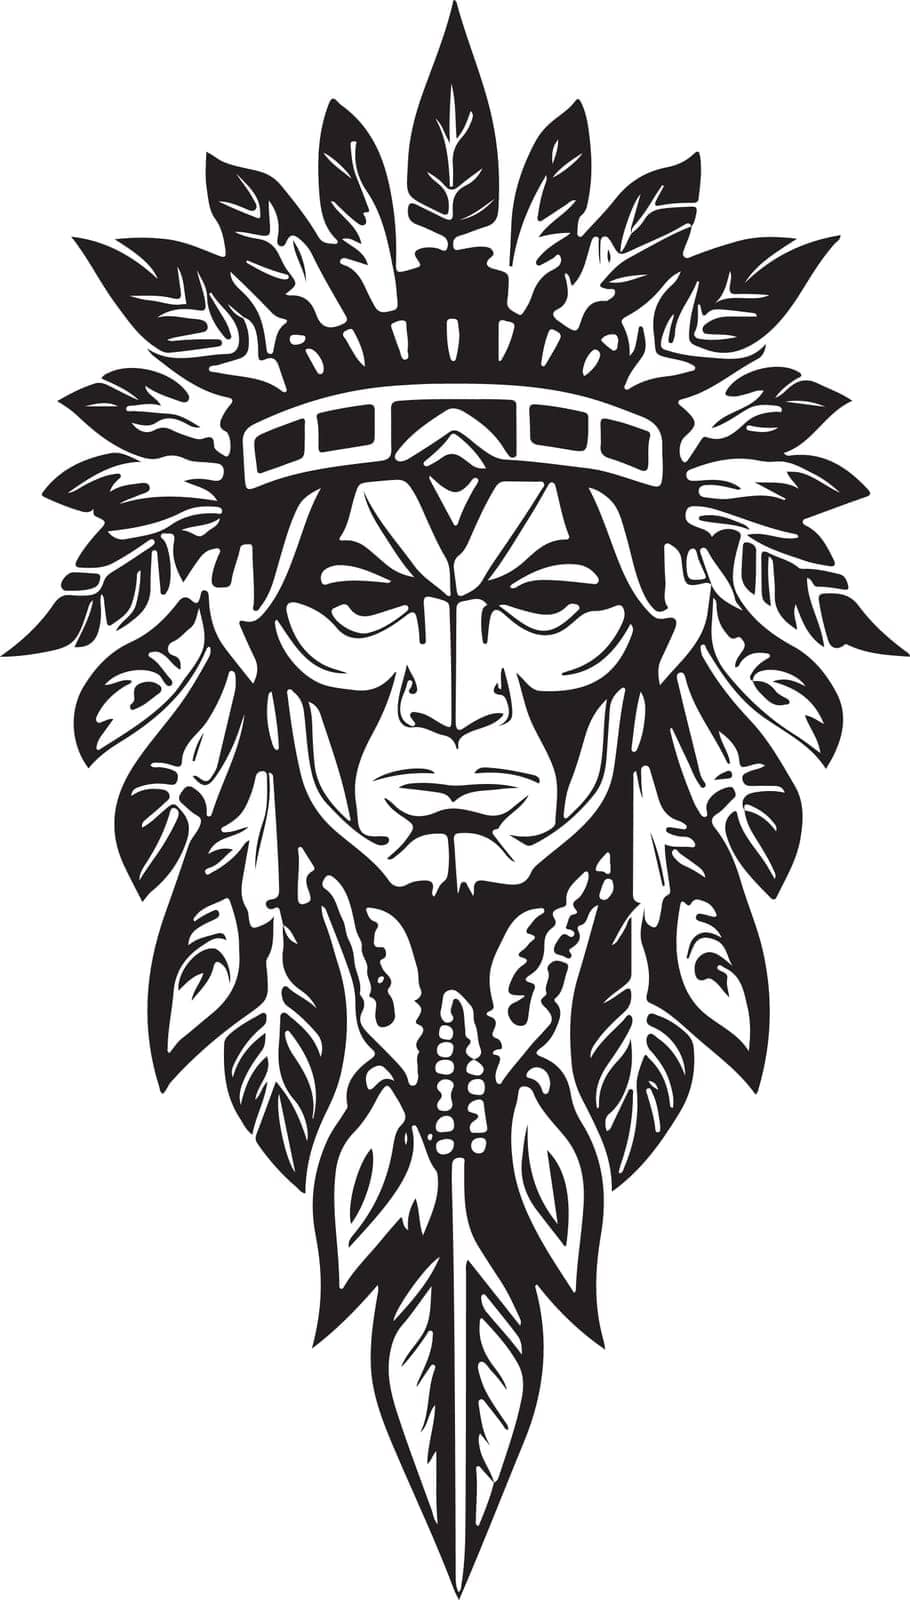 A Beautiful iconic Native American chief in a black and white vector illustration, Suitable for logo design, tattoo design or print on demand. Vector illustration